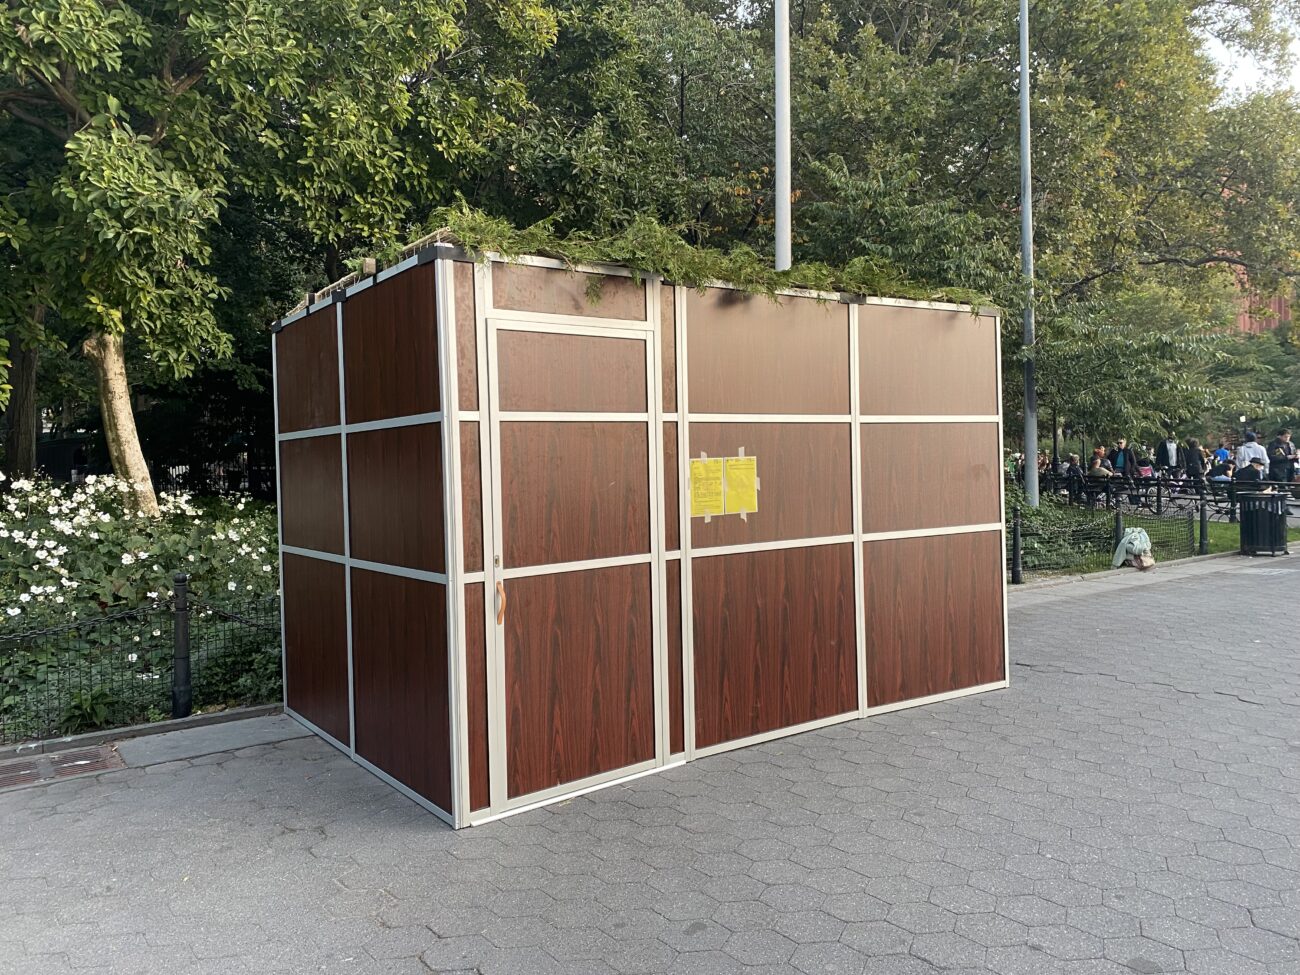 Washington Square Park's Sukkah: a rectangular construction with brown walls and a green roof